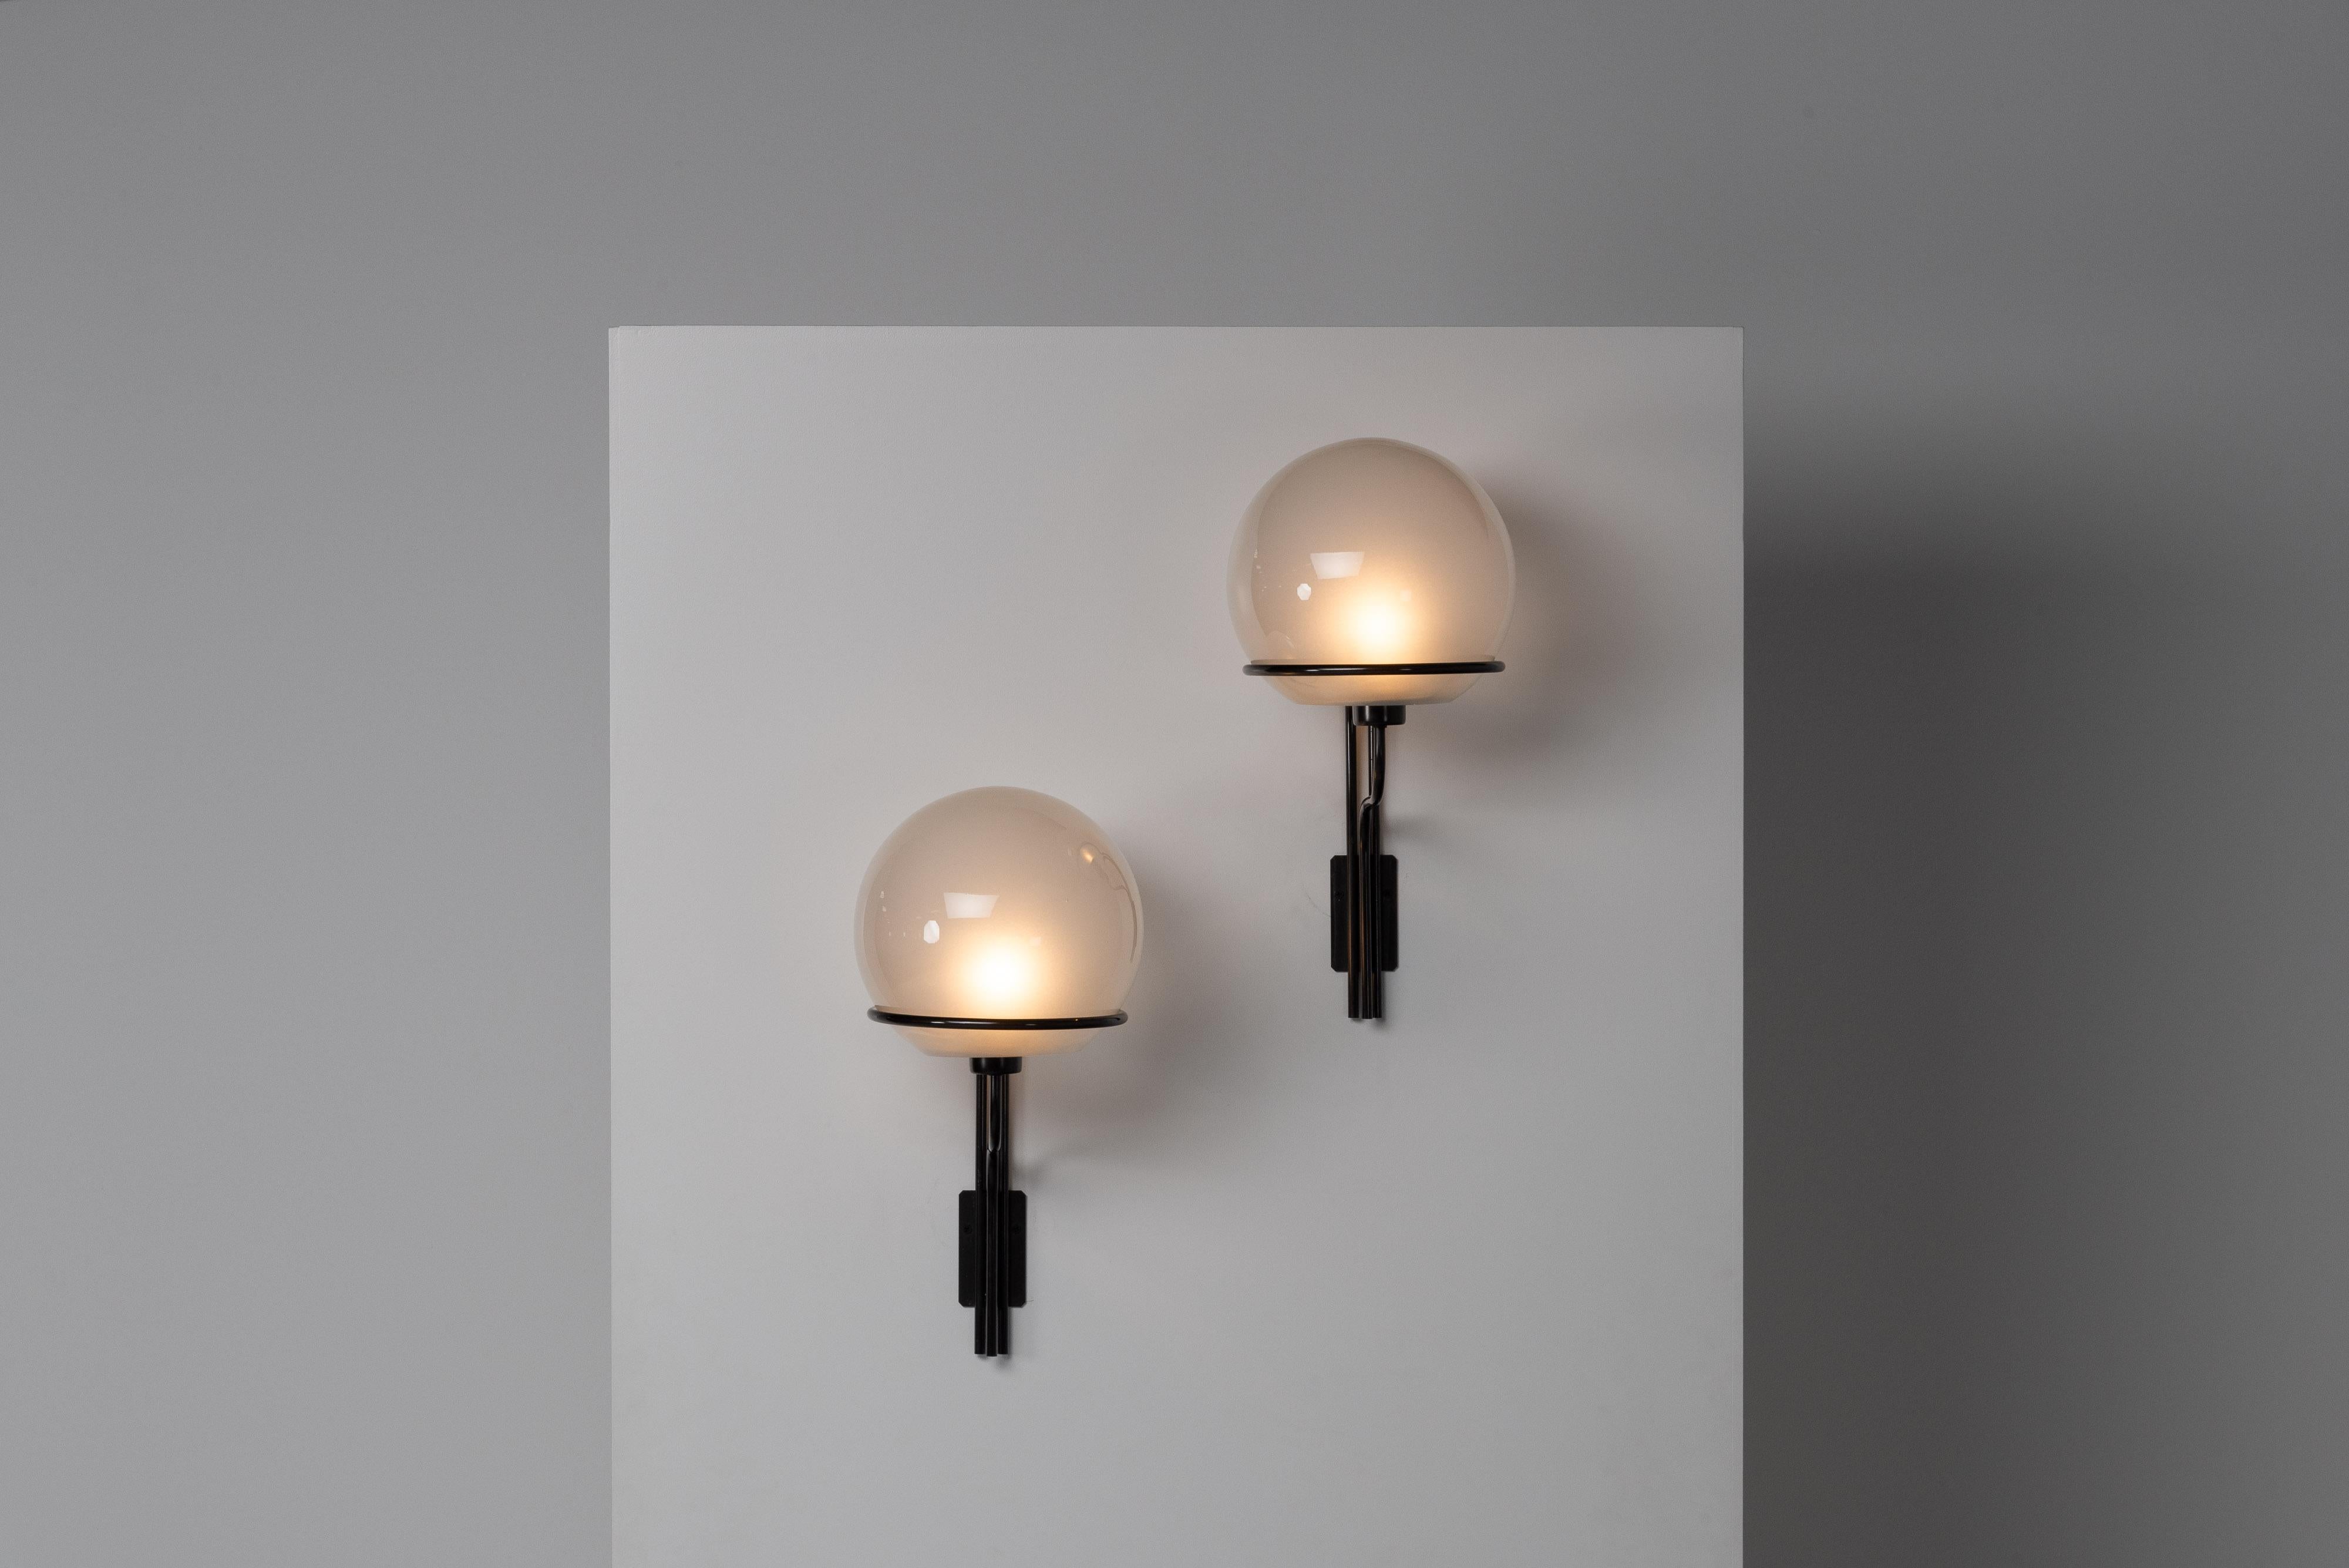 Rare large sconces model 256 designed by Ico Parisi and manufactured by Arteluce in Italy in 1964. These elegant lamps have the original frosted glass shades inside, giving a lovely diffused light. The metal structure is not only beautifully made